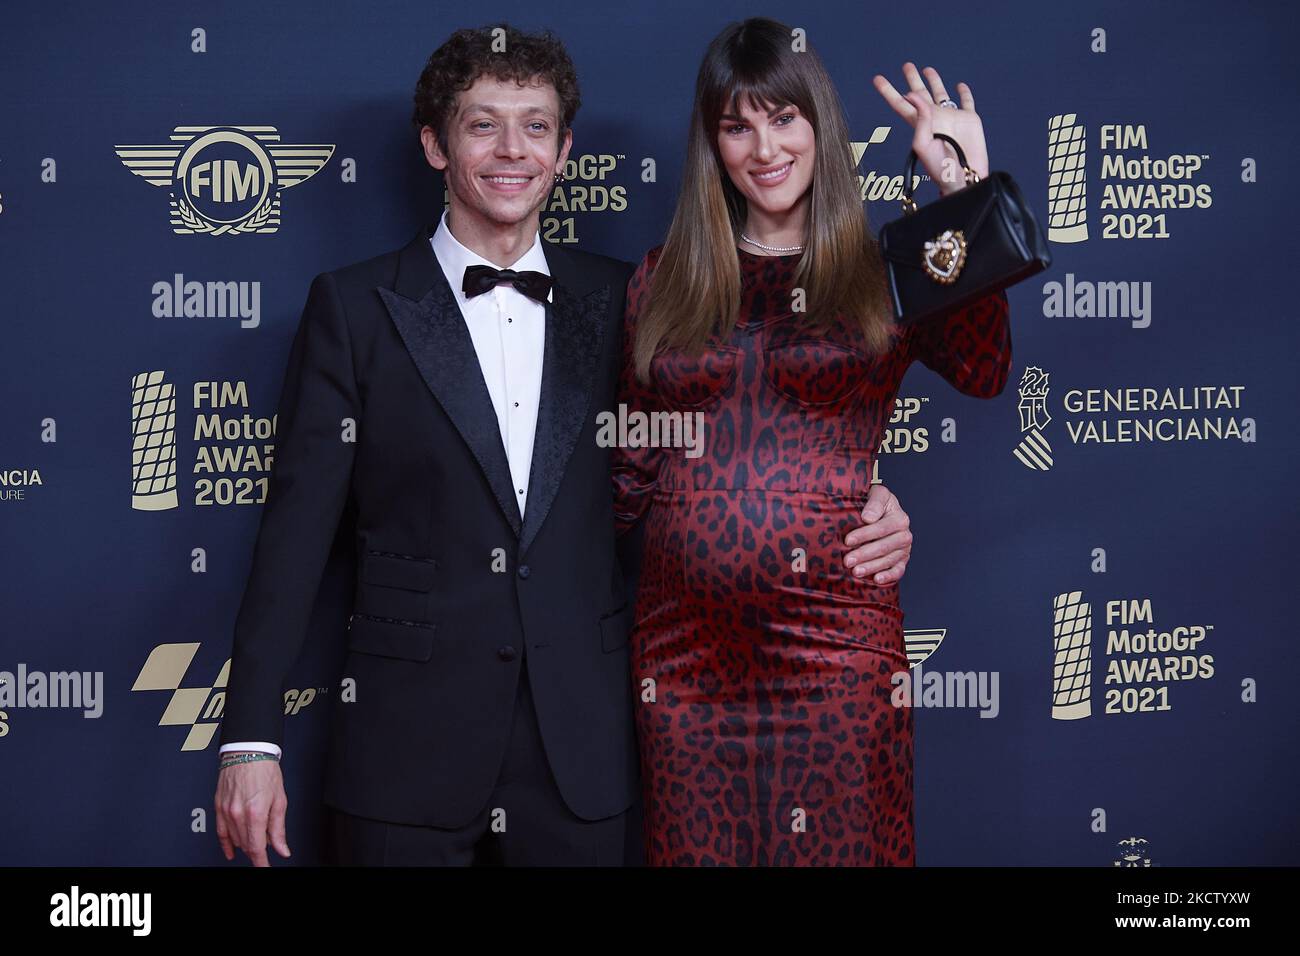 Valentino Rossi and his wife Francesca Sofia Novello on the red carpet  before during the FIM MotoGP Awards Ceremony at Fira de Valencia on  November 14, 2021 in Valencia, Spain. (Photo by